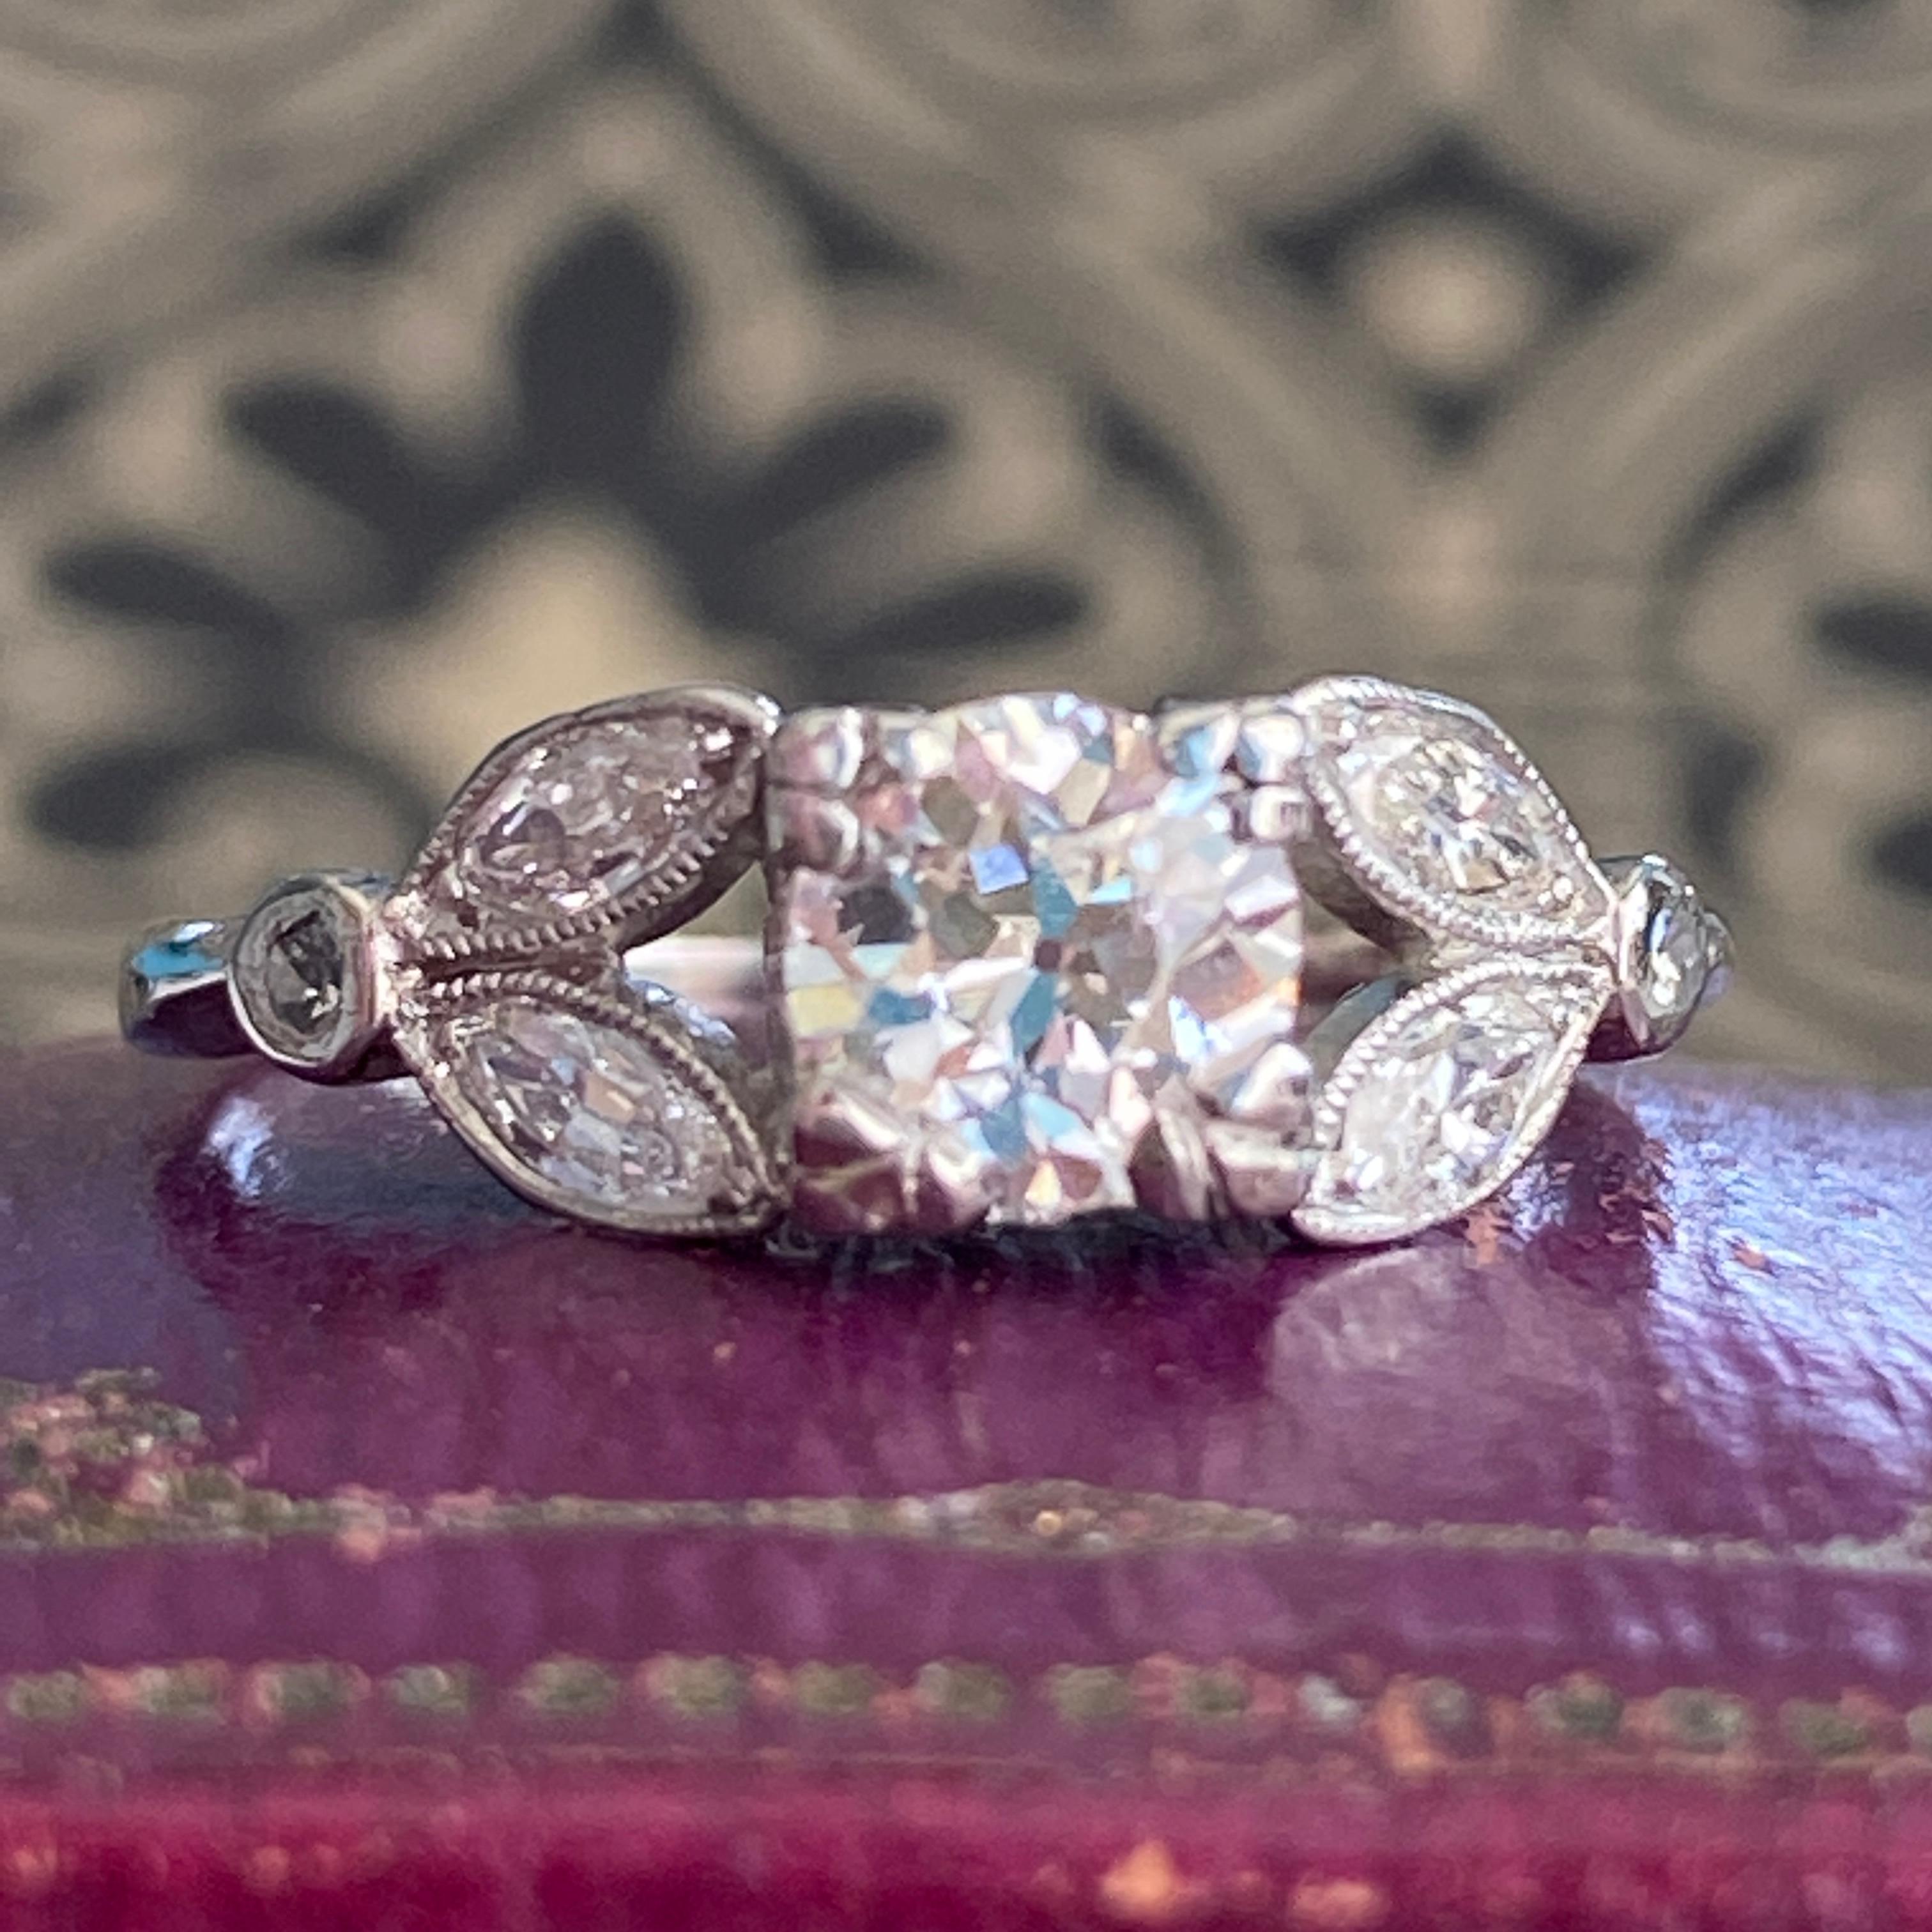 Details:
Lovely 1930-1940's sweet 14K and Old European Cut Diamond ring. Sweet and delicate this ring would make a perfect engagement ring. This ring comes with an appraisal. Please ask all necessary questions prior to placing an